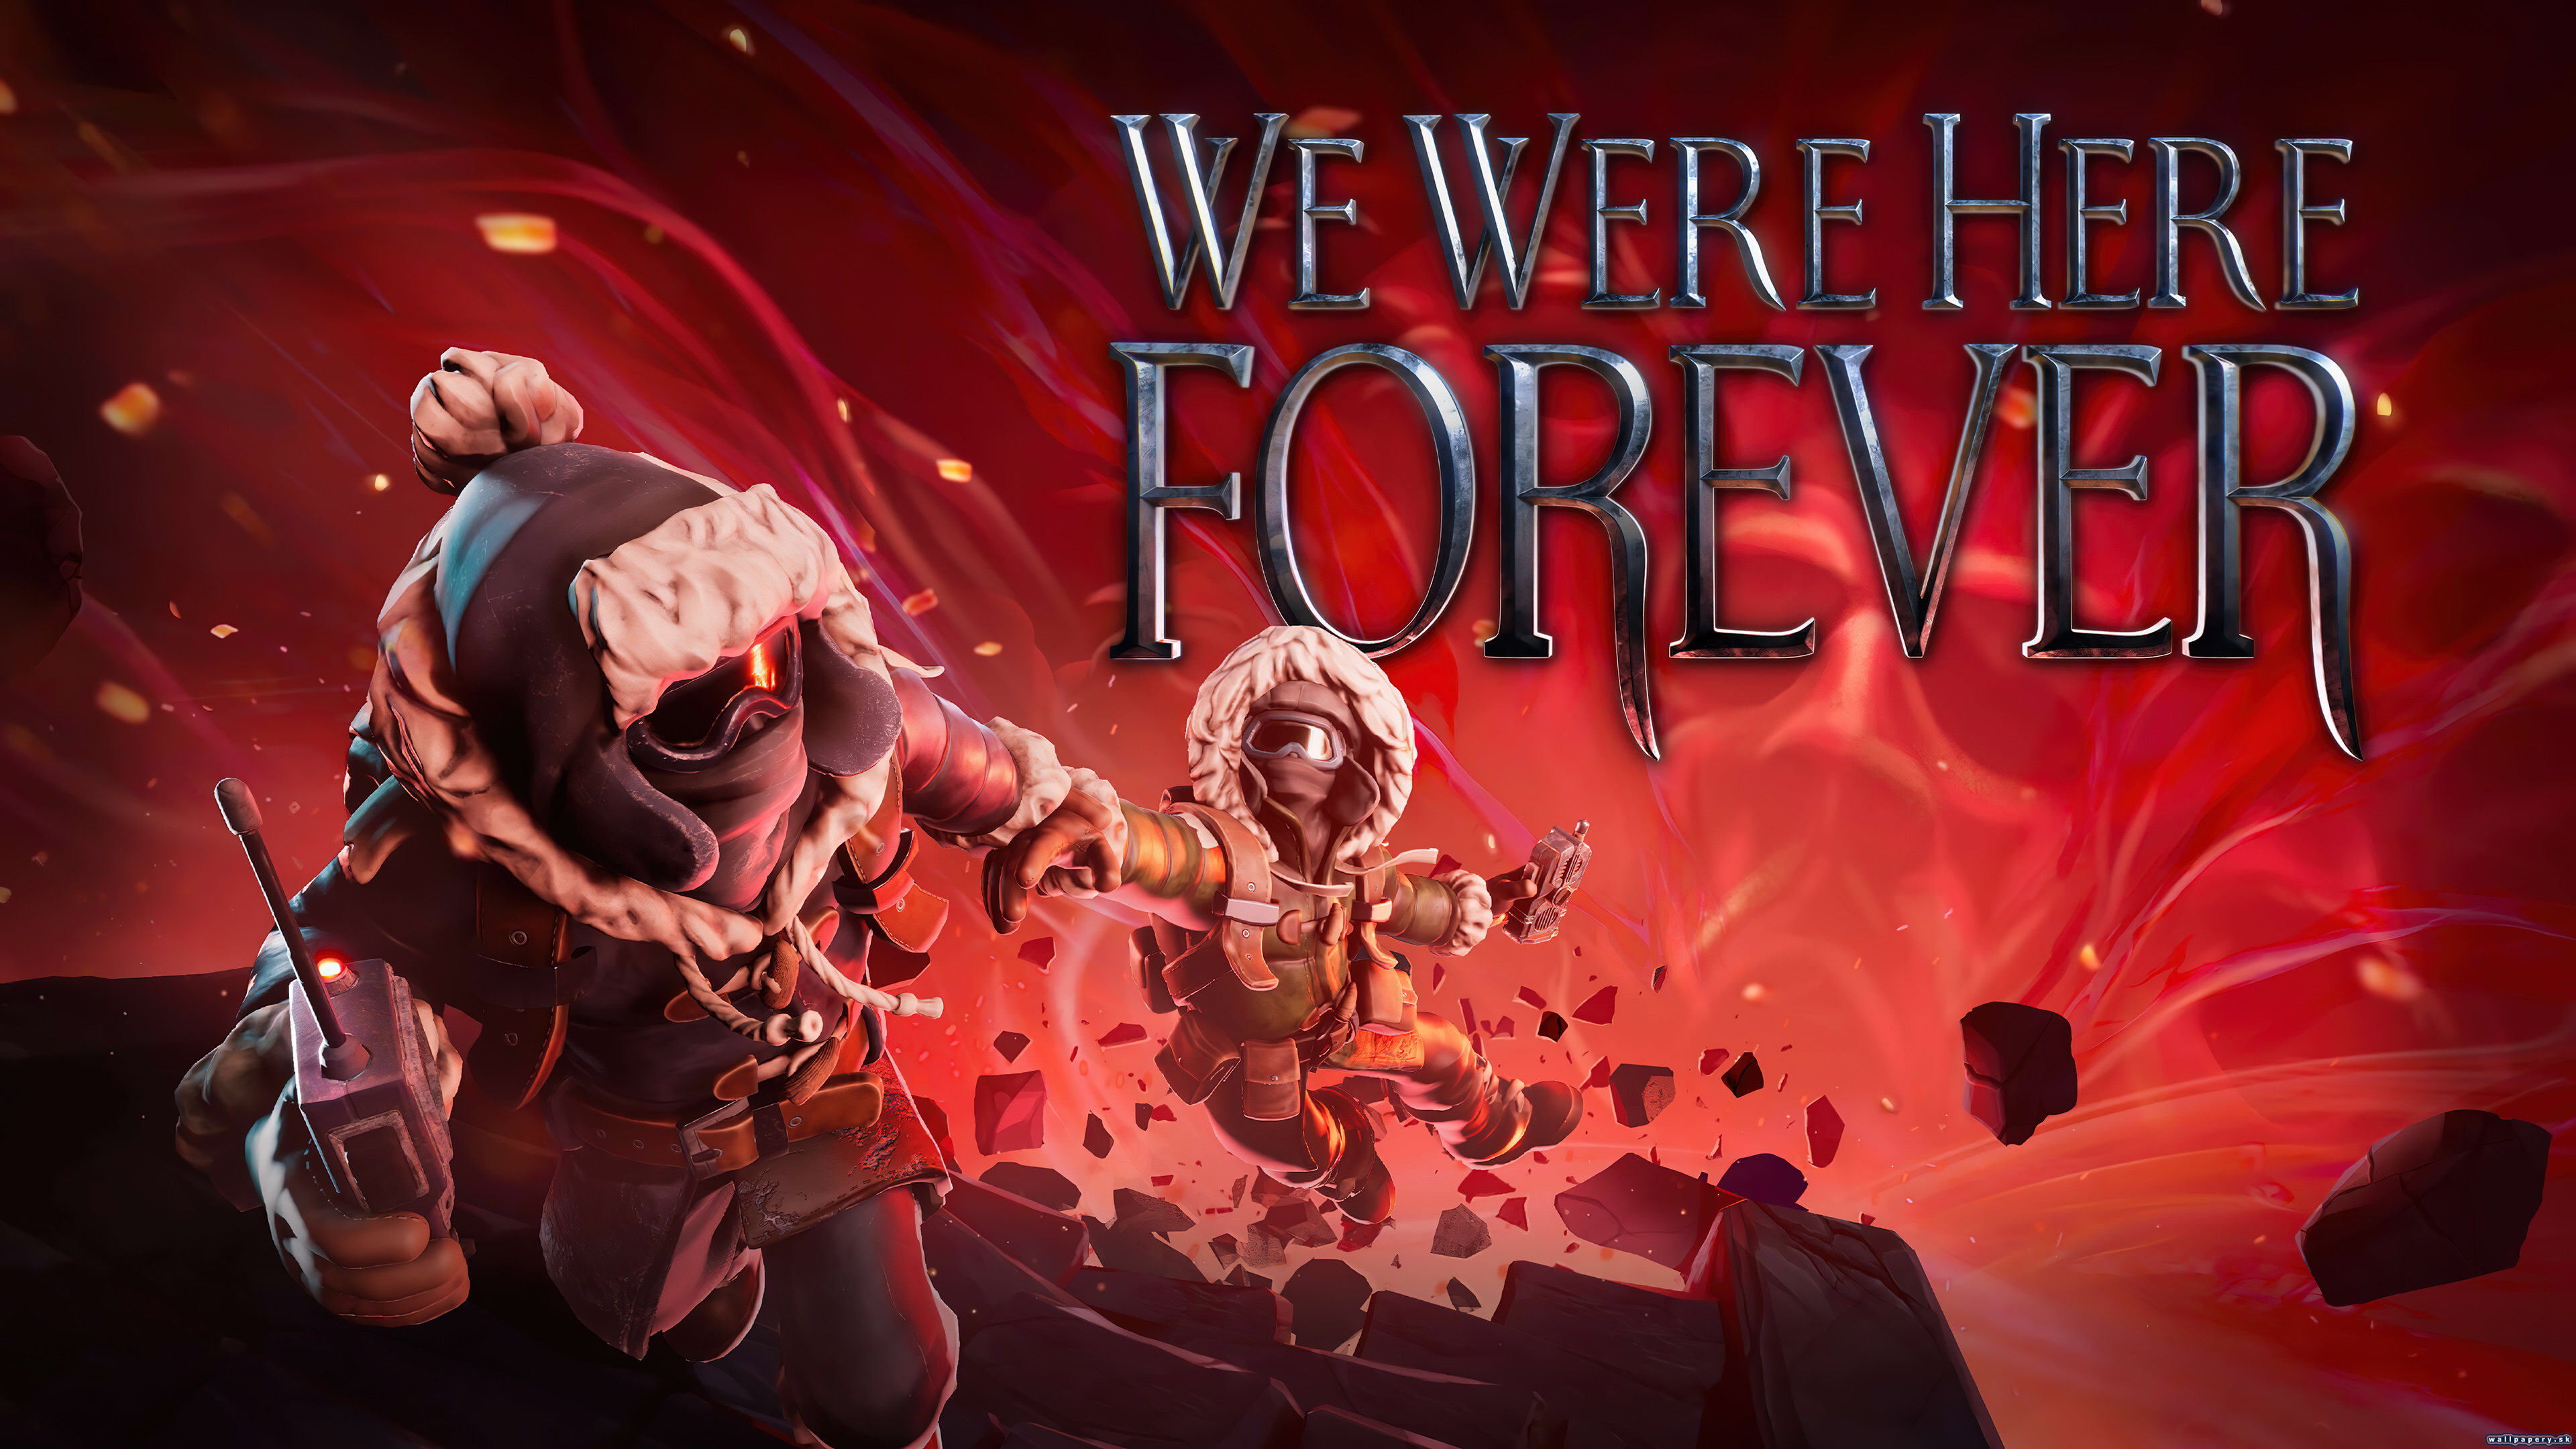 We Were Here Forever - wallpaper 1